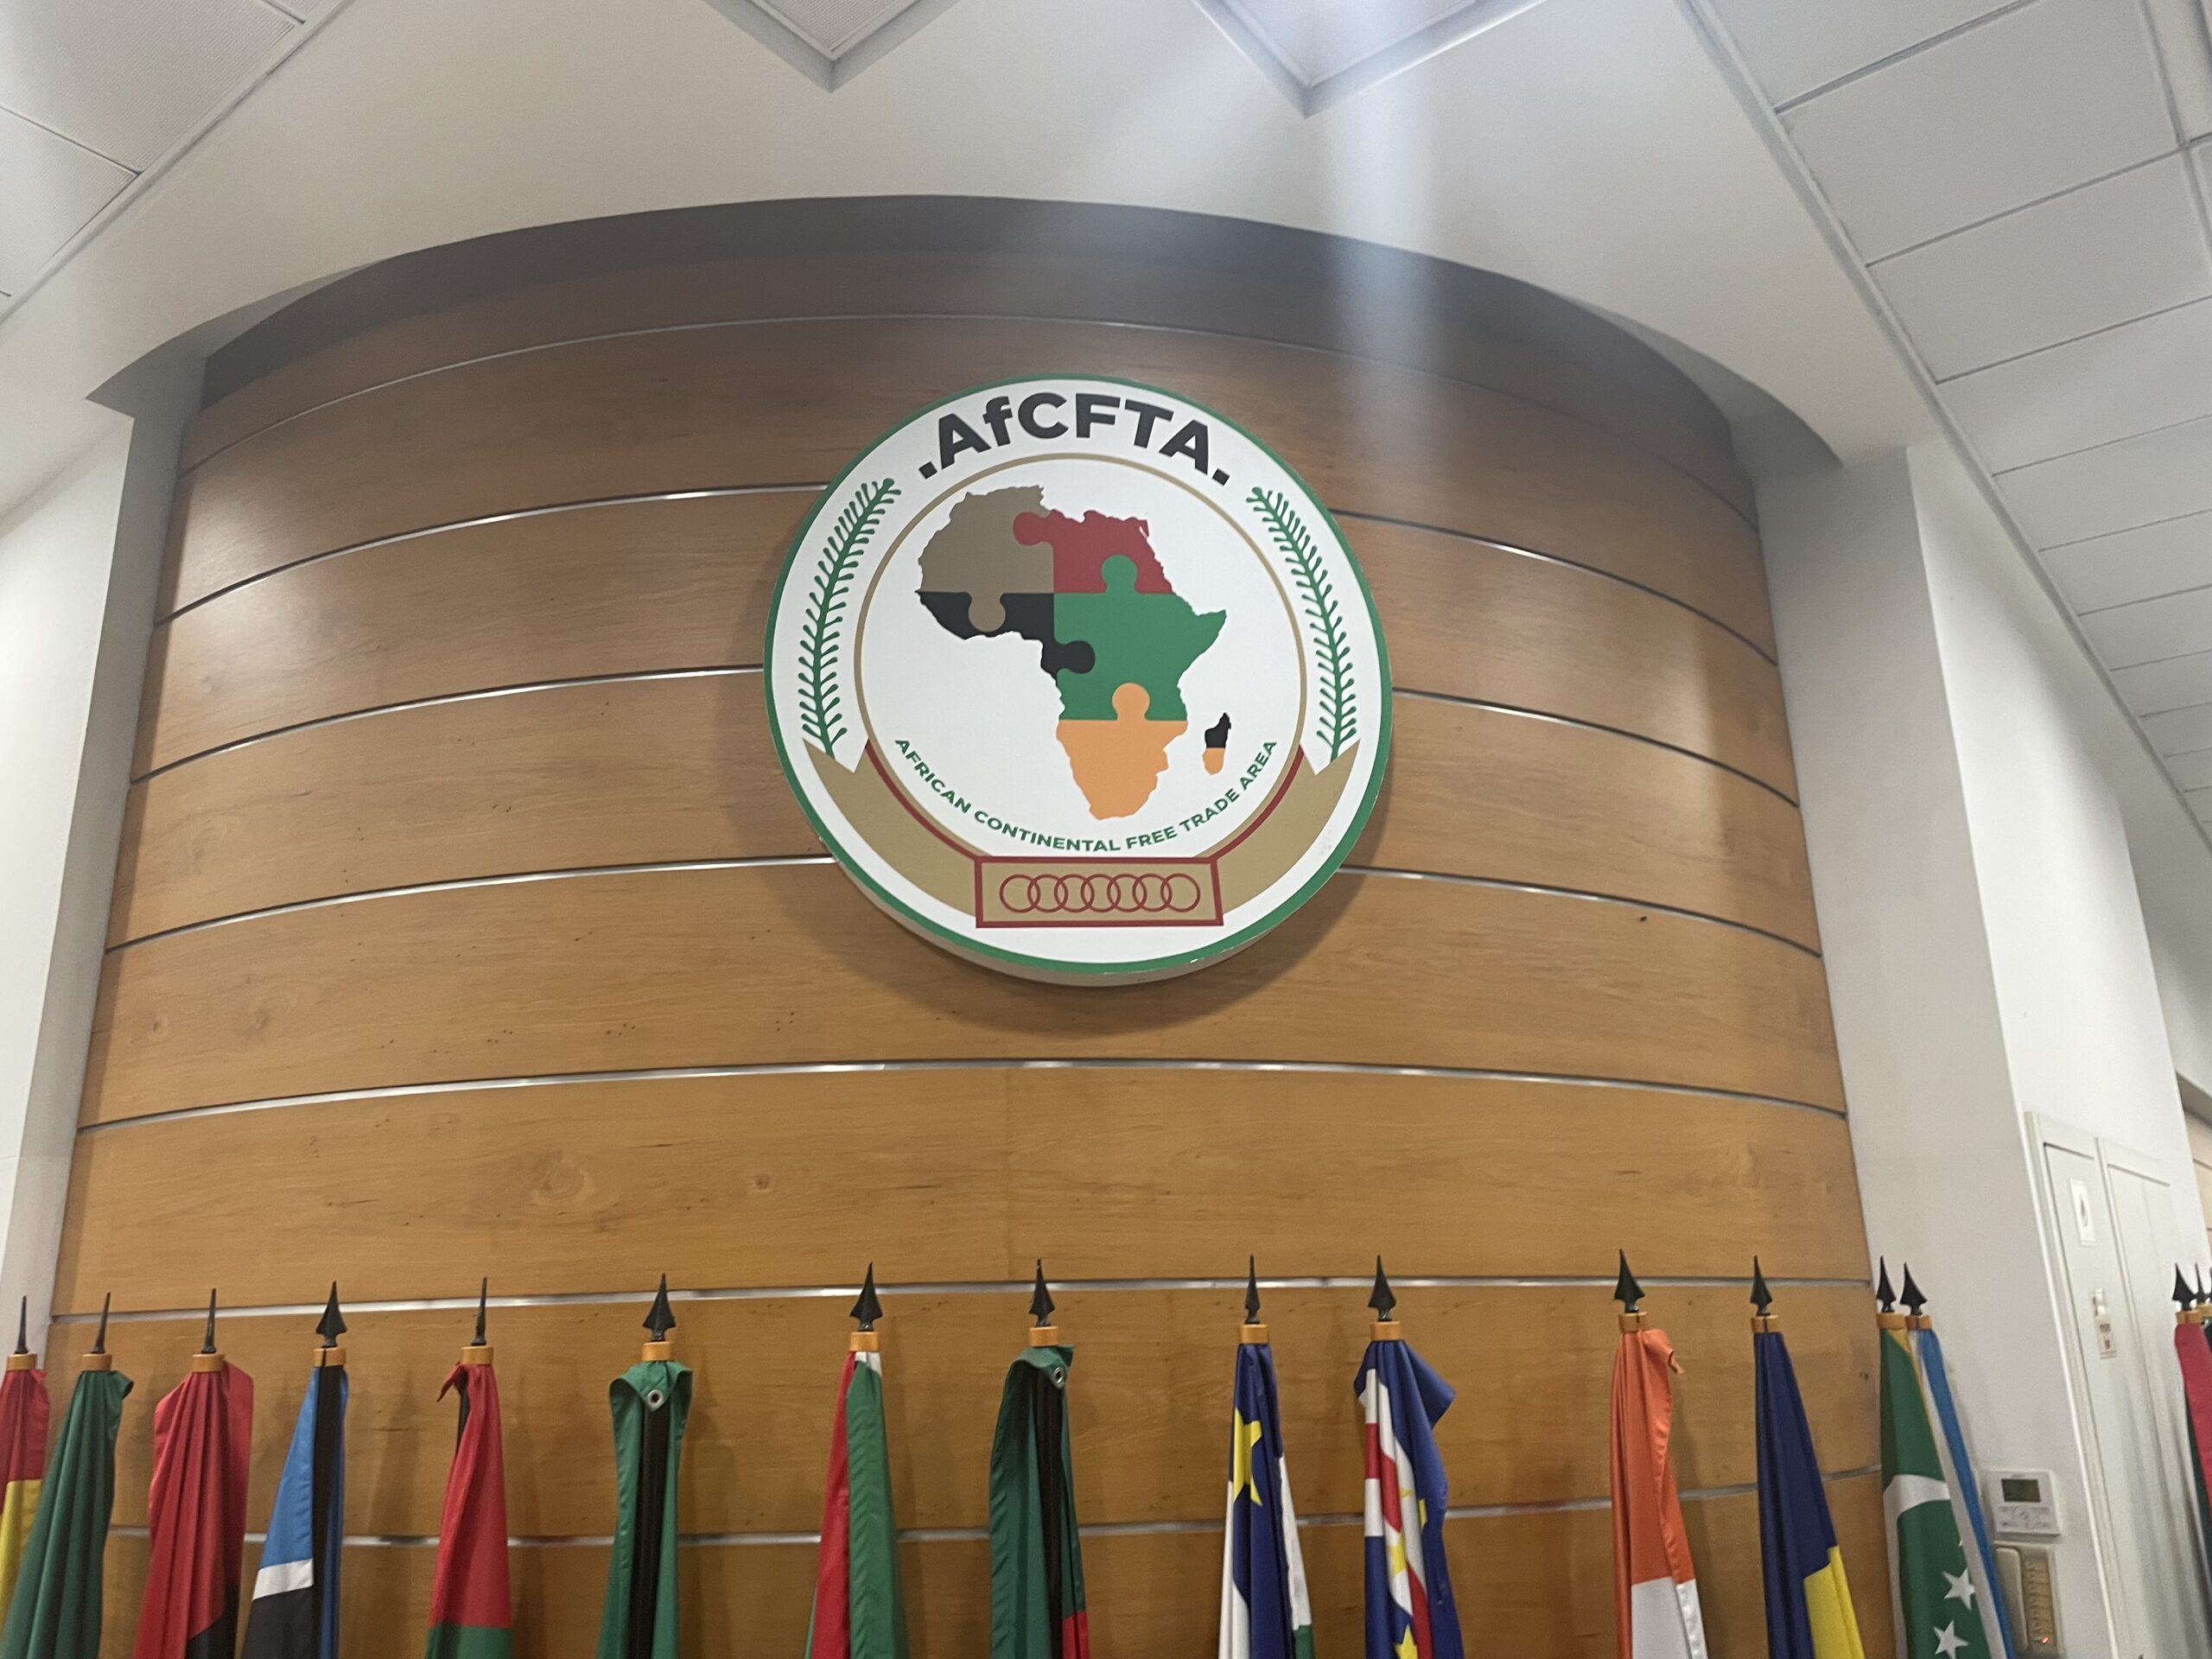 NAPRM-GC to collaborate with AfCFTA National Coordinating Office to empower businesses